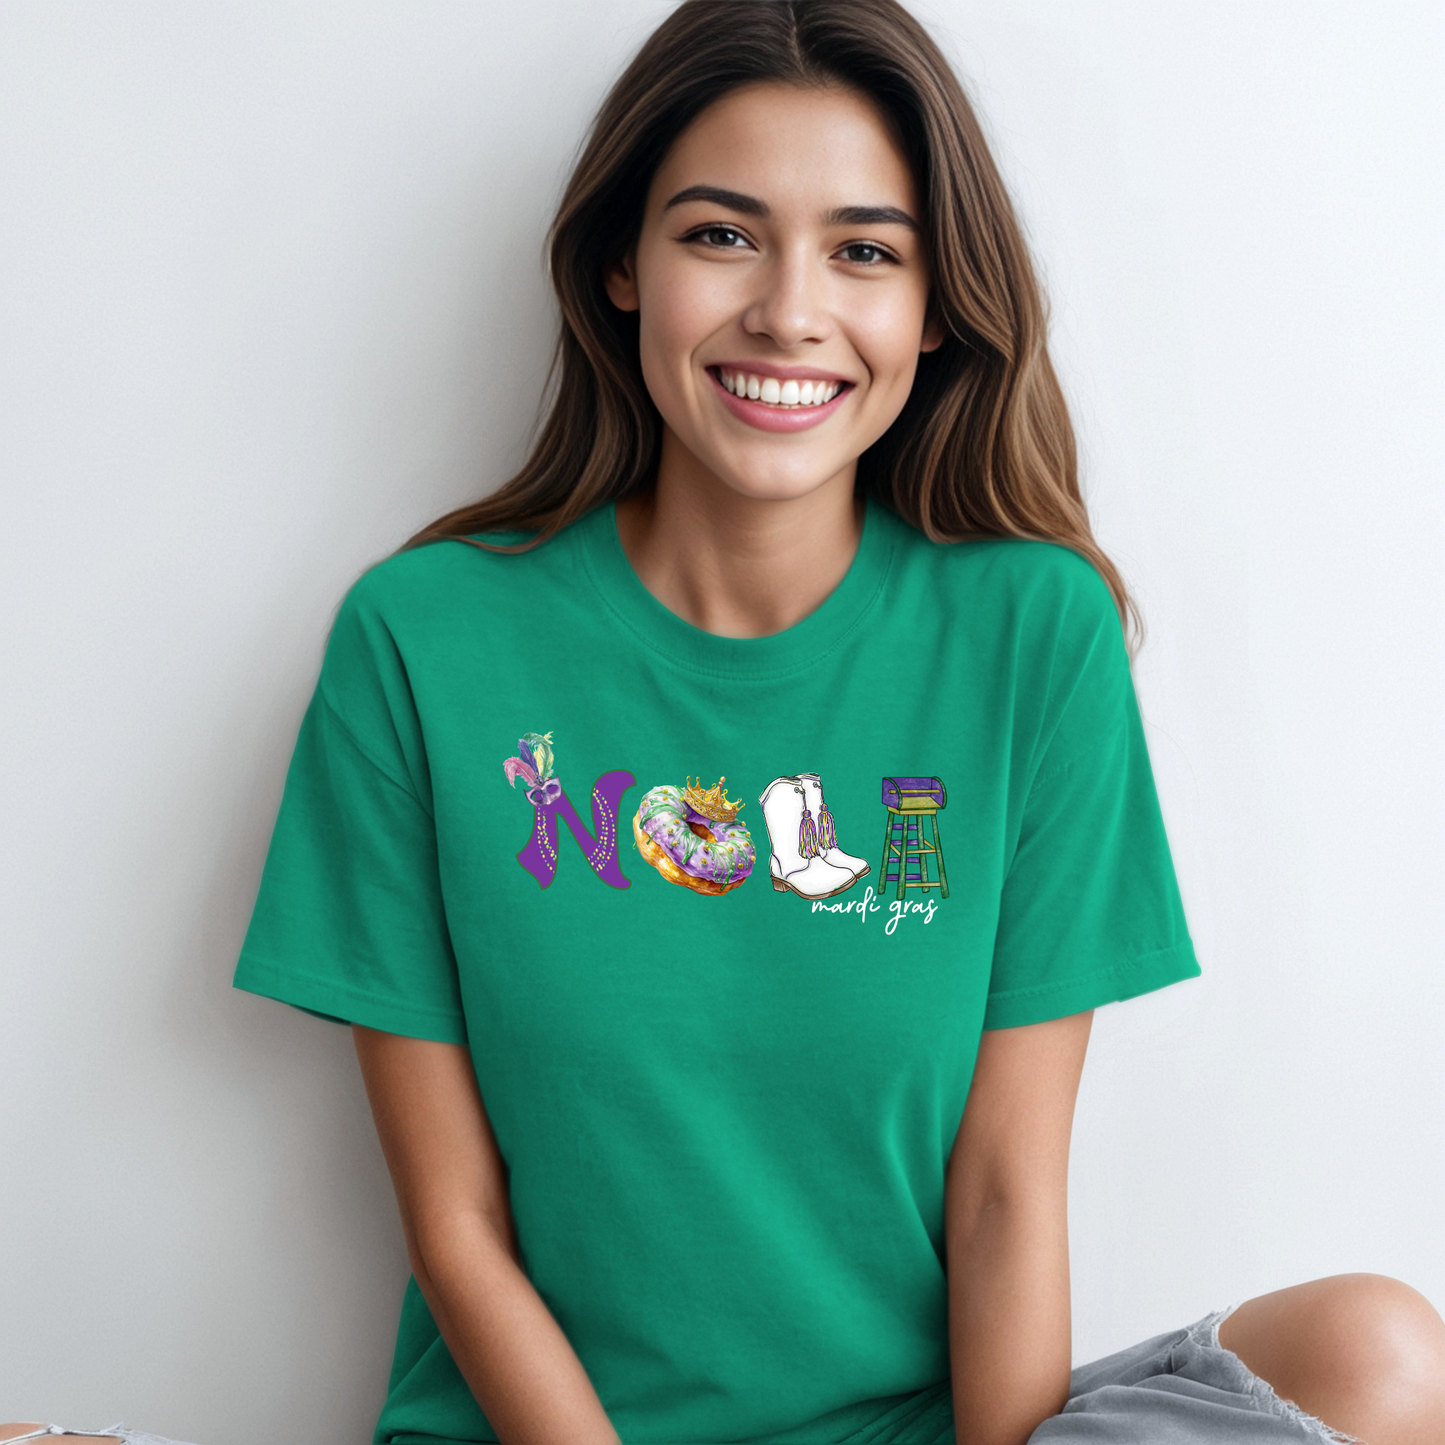 NOLA | Icons Mardi Gras| Comfort Color Short Sleeve Graphic Tees | Youth - Adults